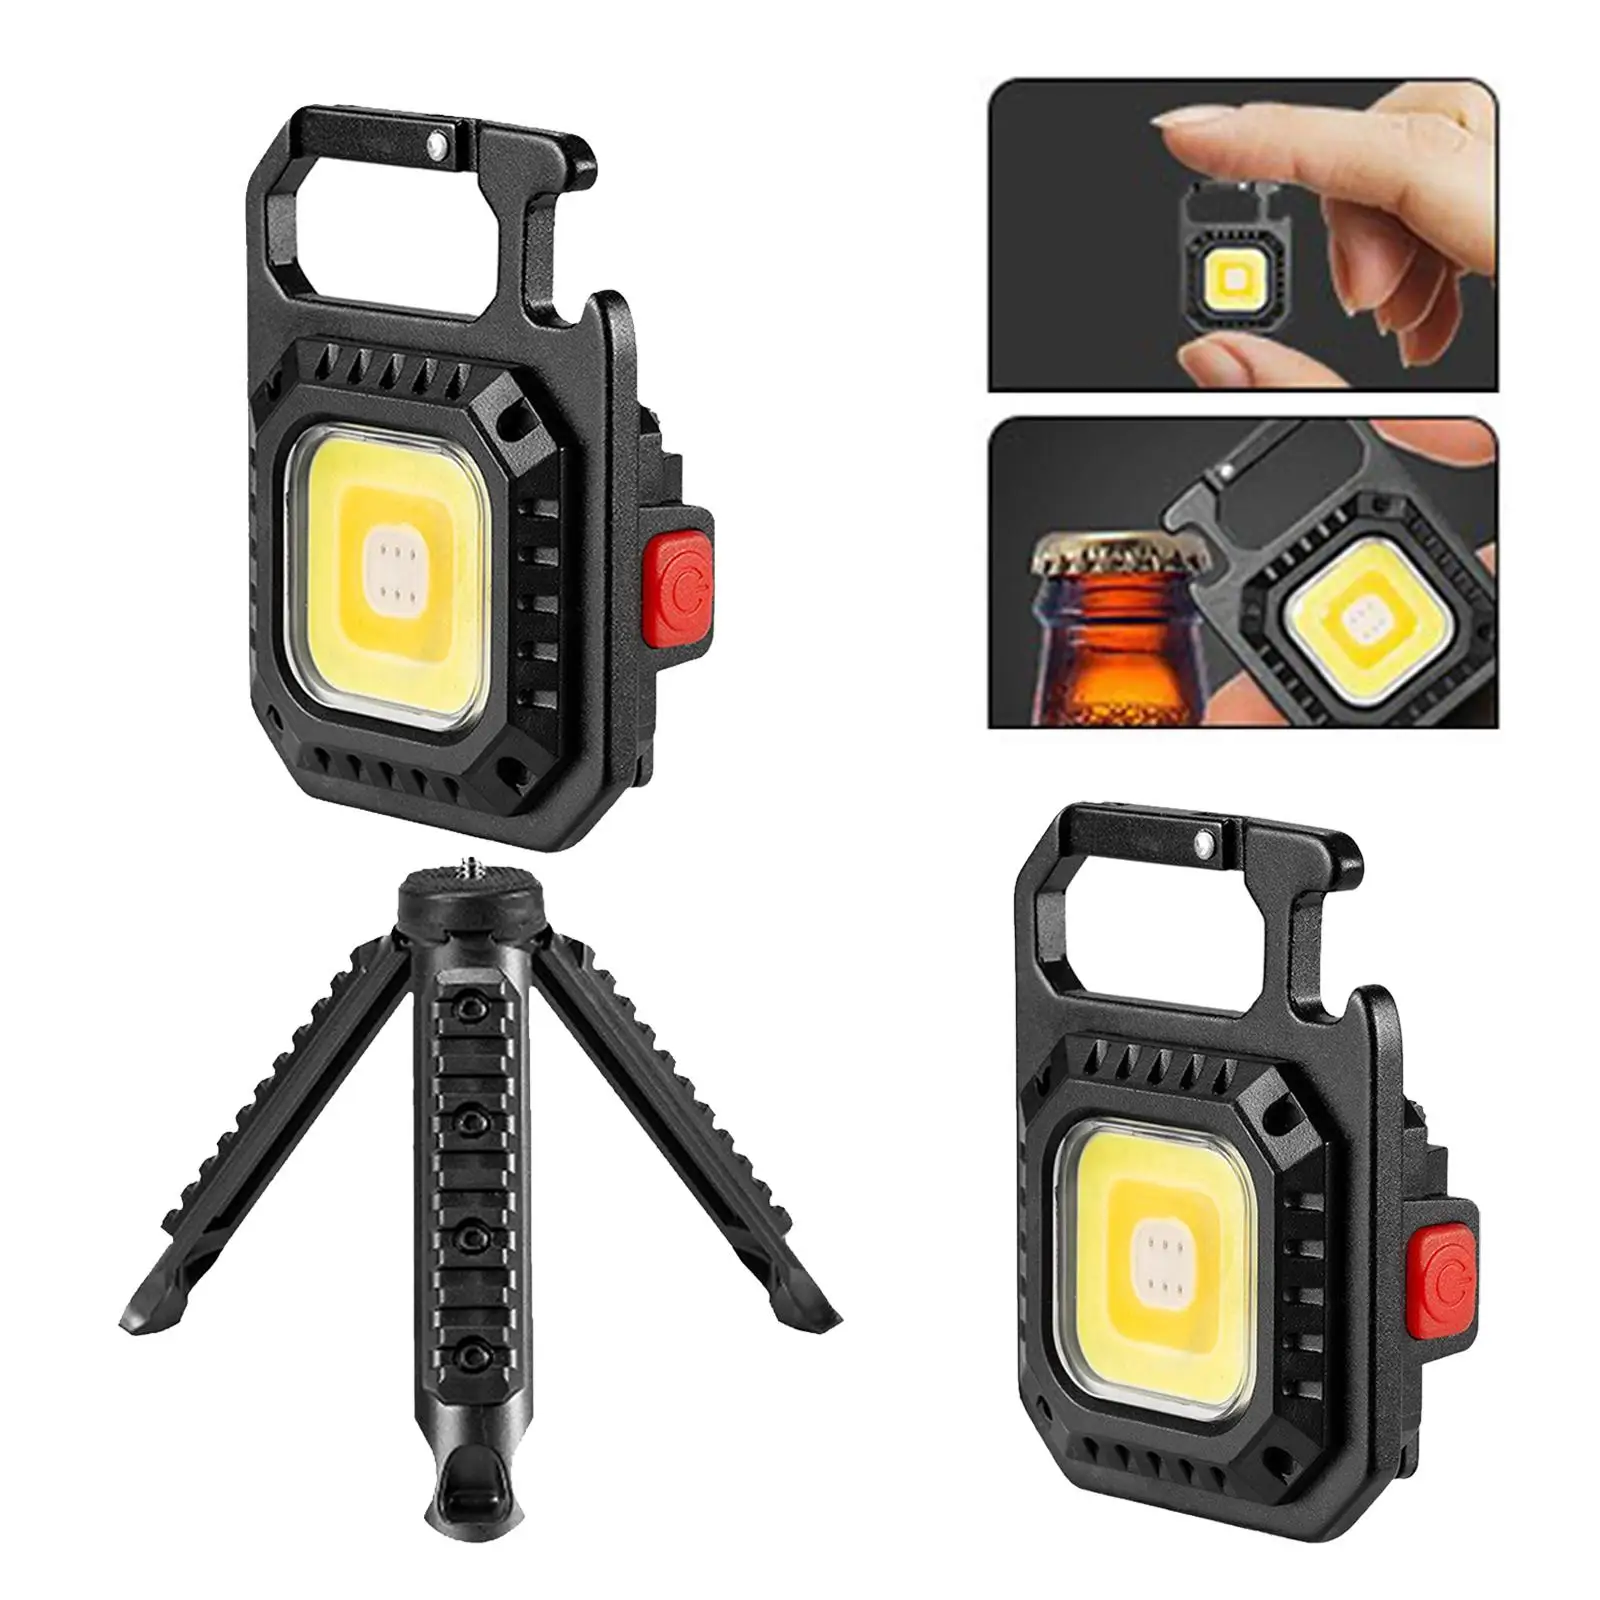 Portable LED Flashlight USB Rechargeable 3 Lighting Modes Adjustable Clips  00 Lumens for repair Outdoor Camping Walking